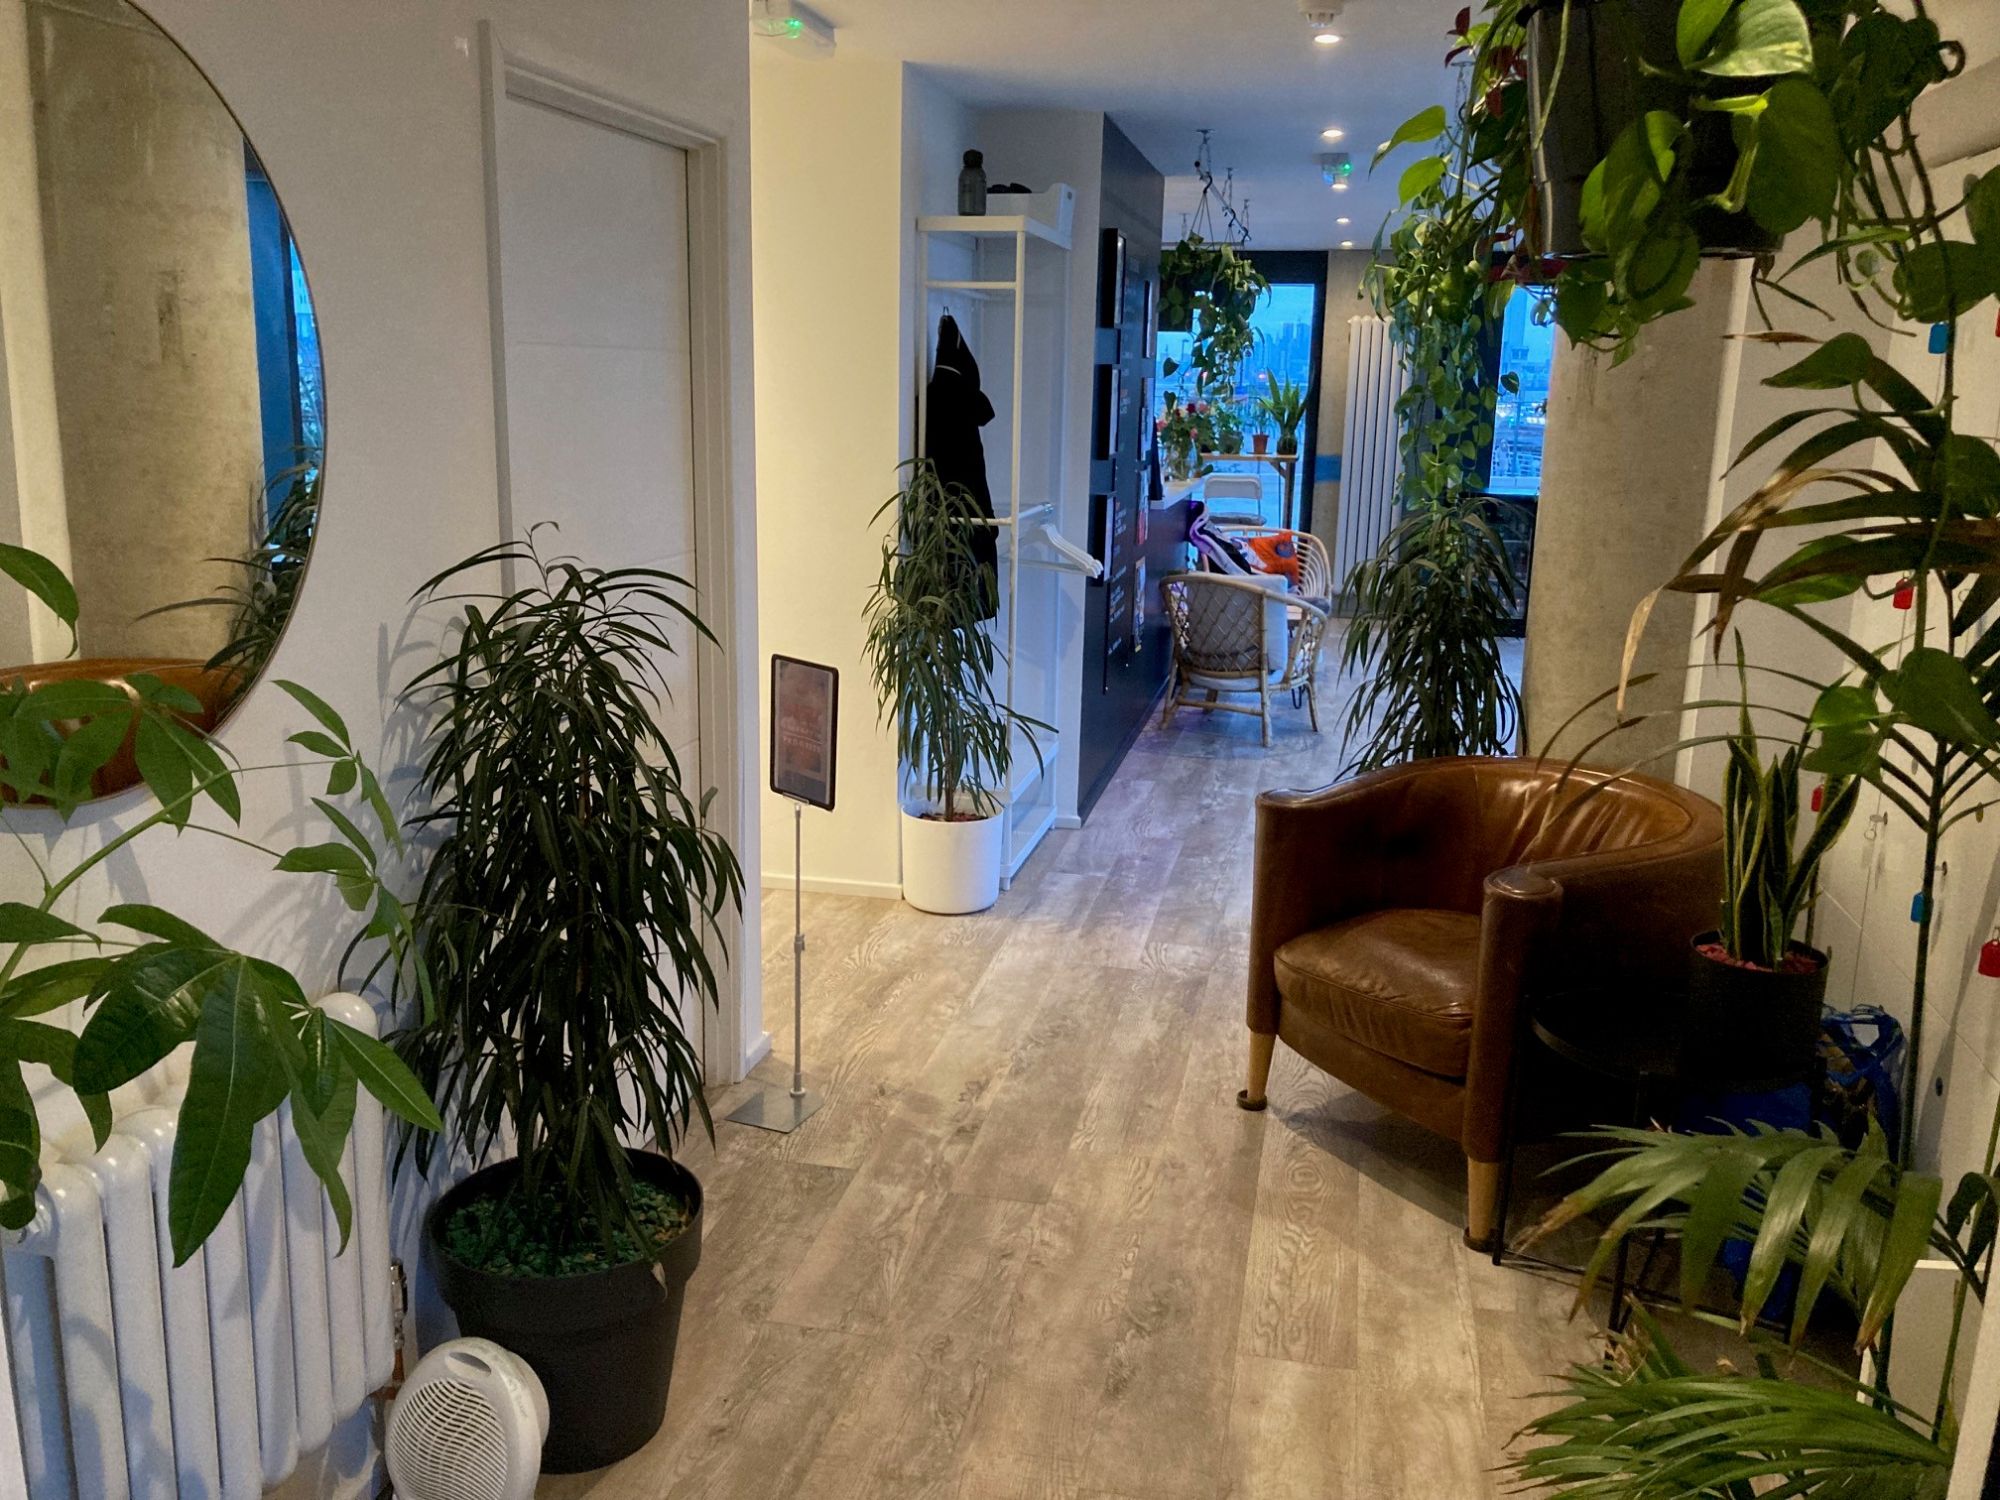 Jungle plants and riverside views in Woolwich hypnobirthing venue